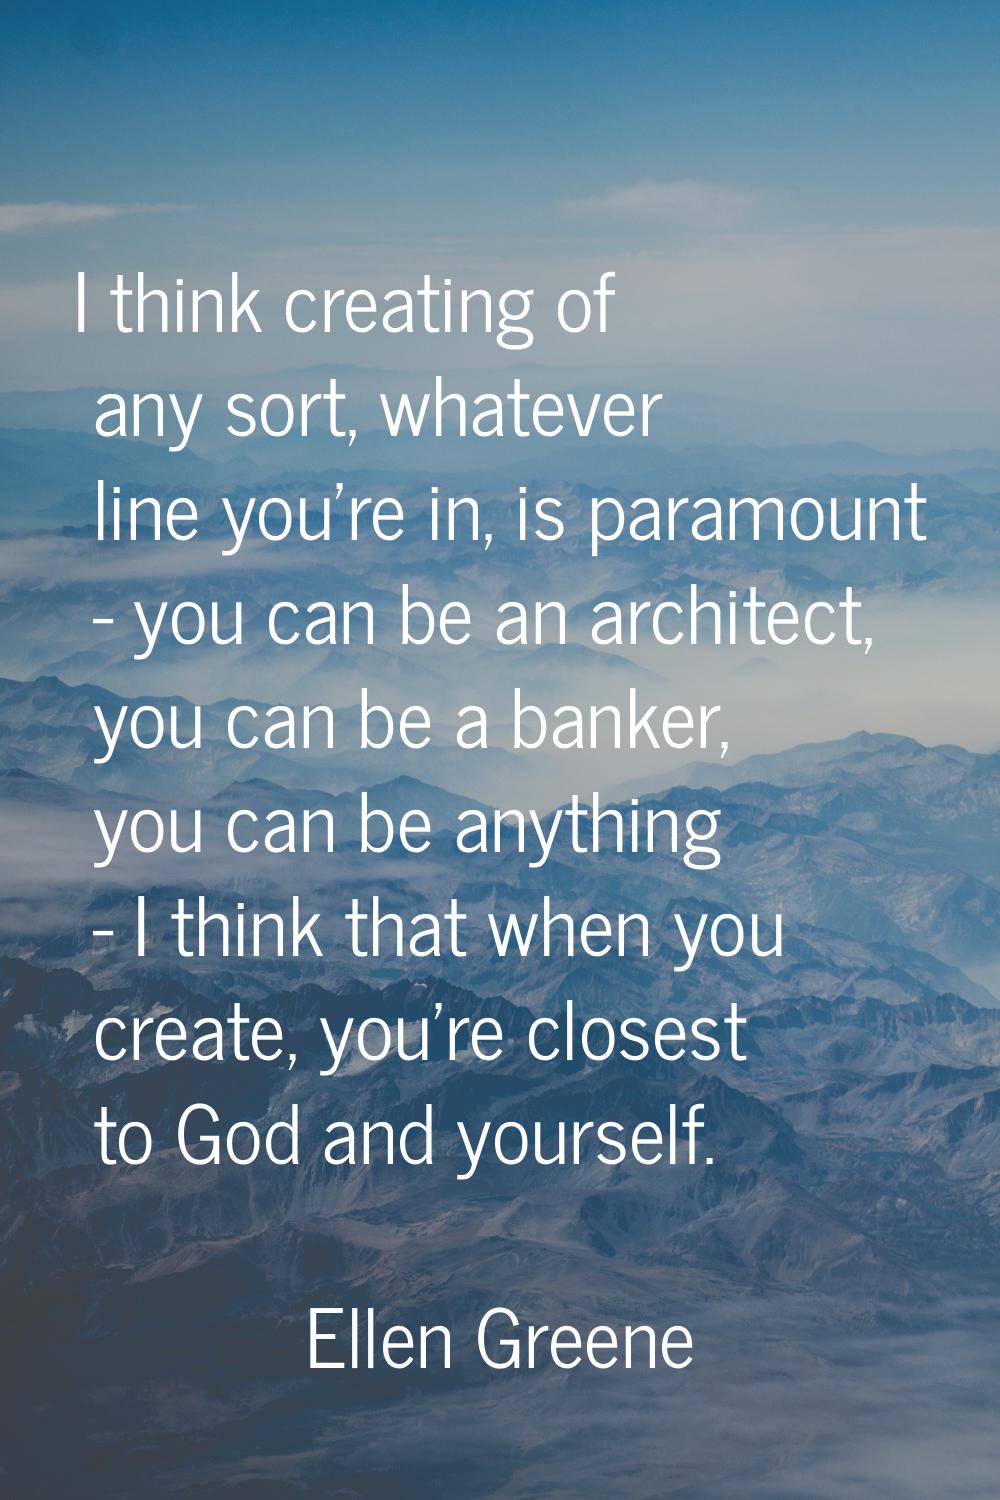 I think creating of any sort, whatever line you're in, is paramount - you can be an architect, you 